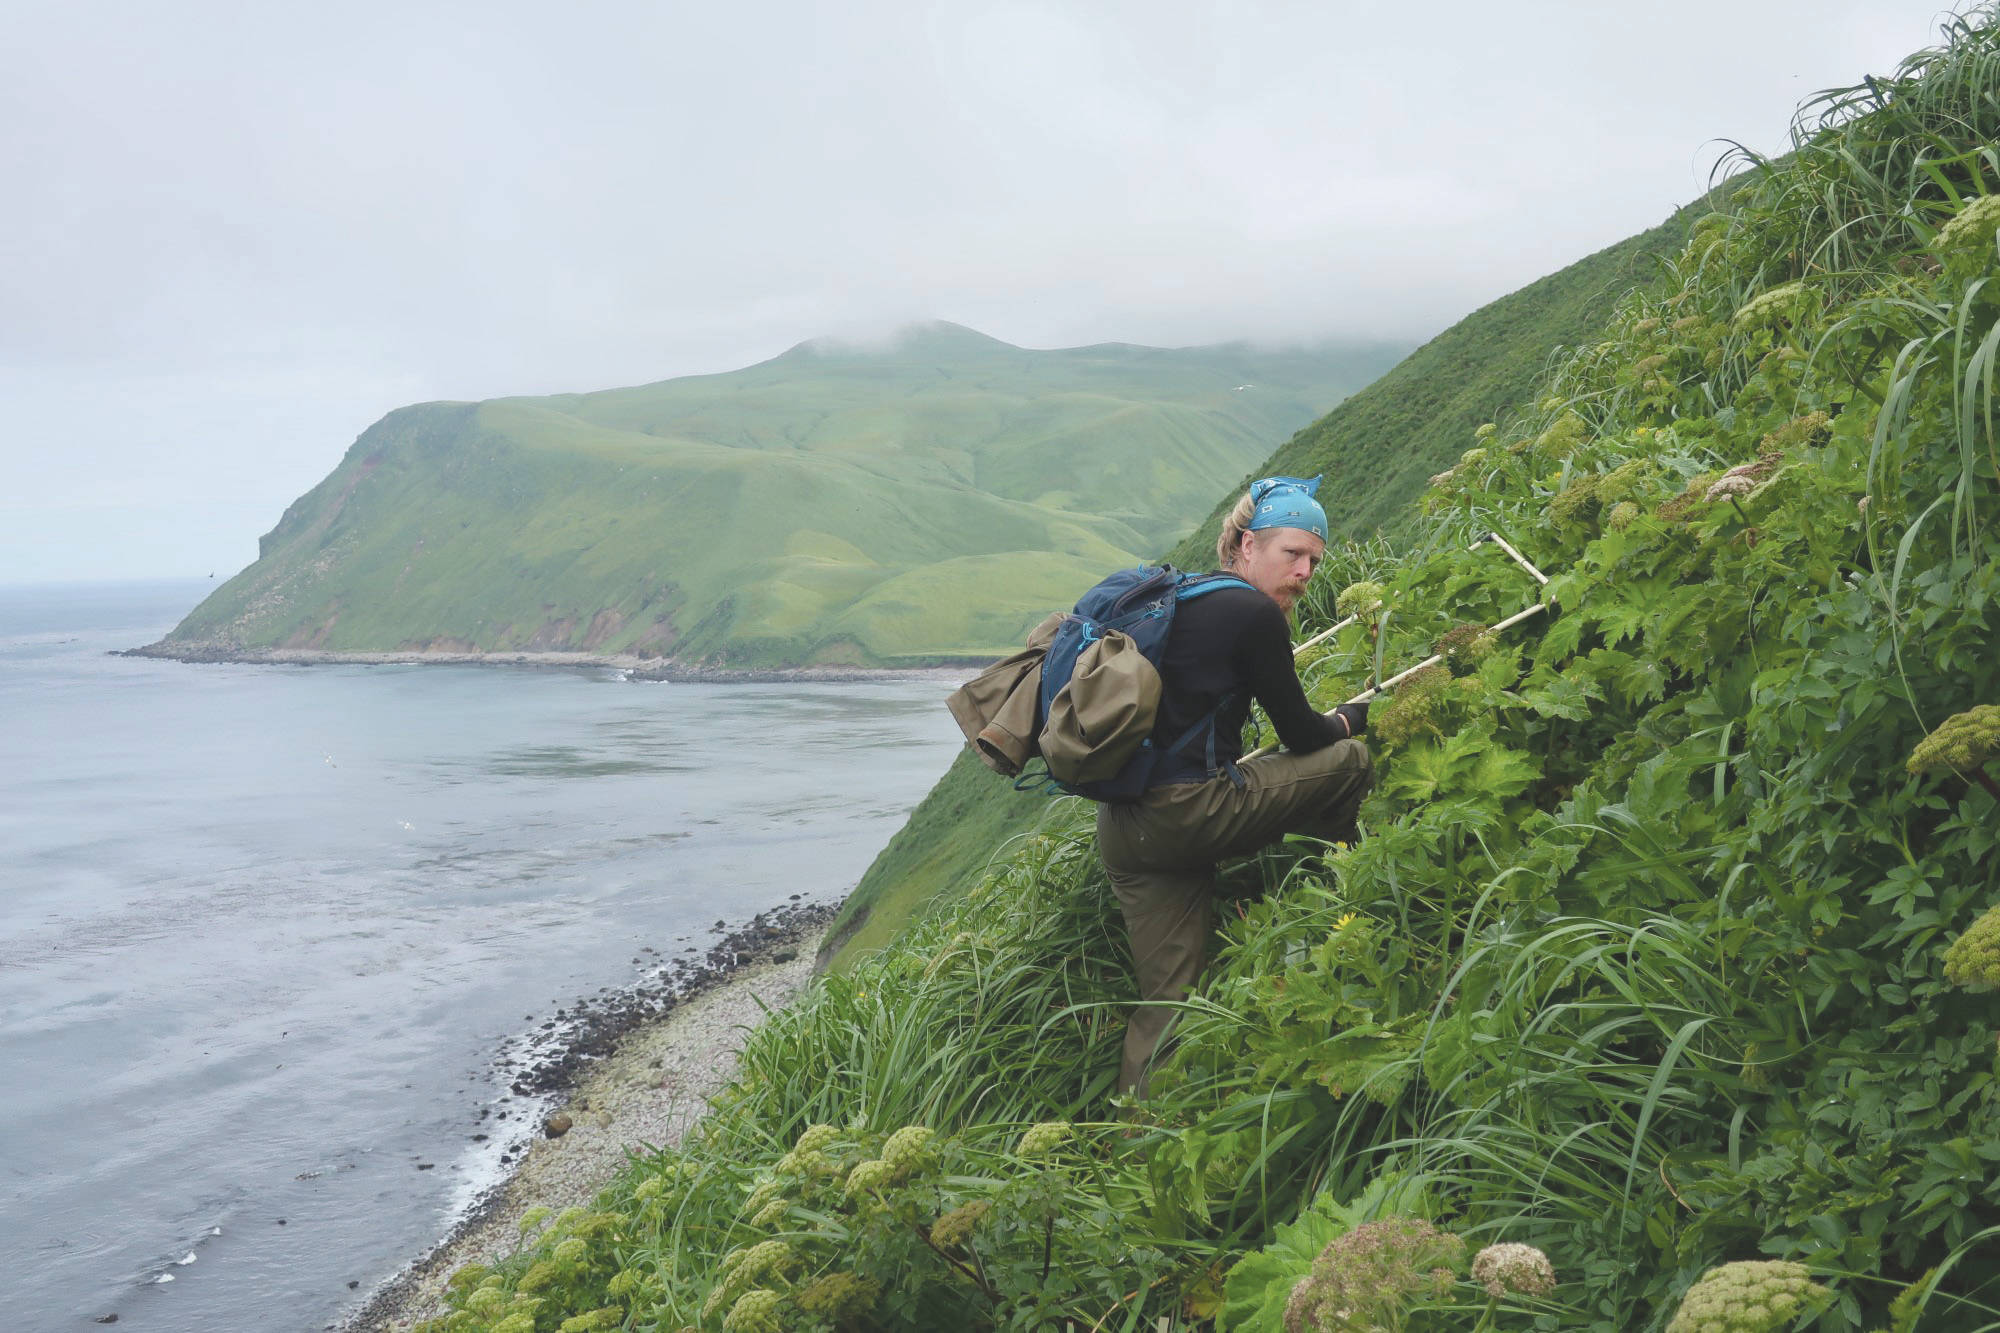 Kevin Pietrzak conducts tufted puffin burrow surveys on Buldir Island in the western Aleutians. Kevin has worked for Alaska Maritime National Wildlife Refuge for the last five summers. (Photo by McKenzie Mudge)